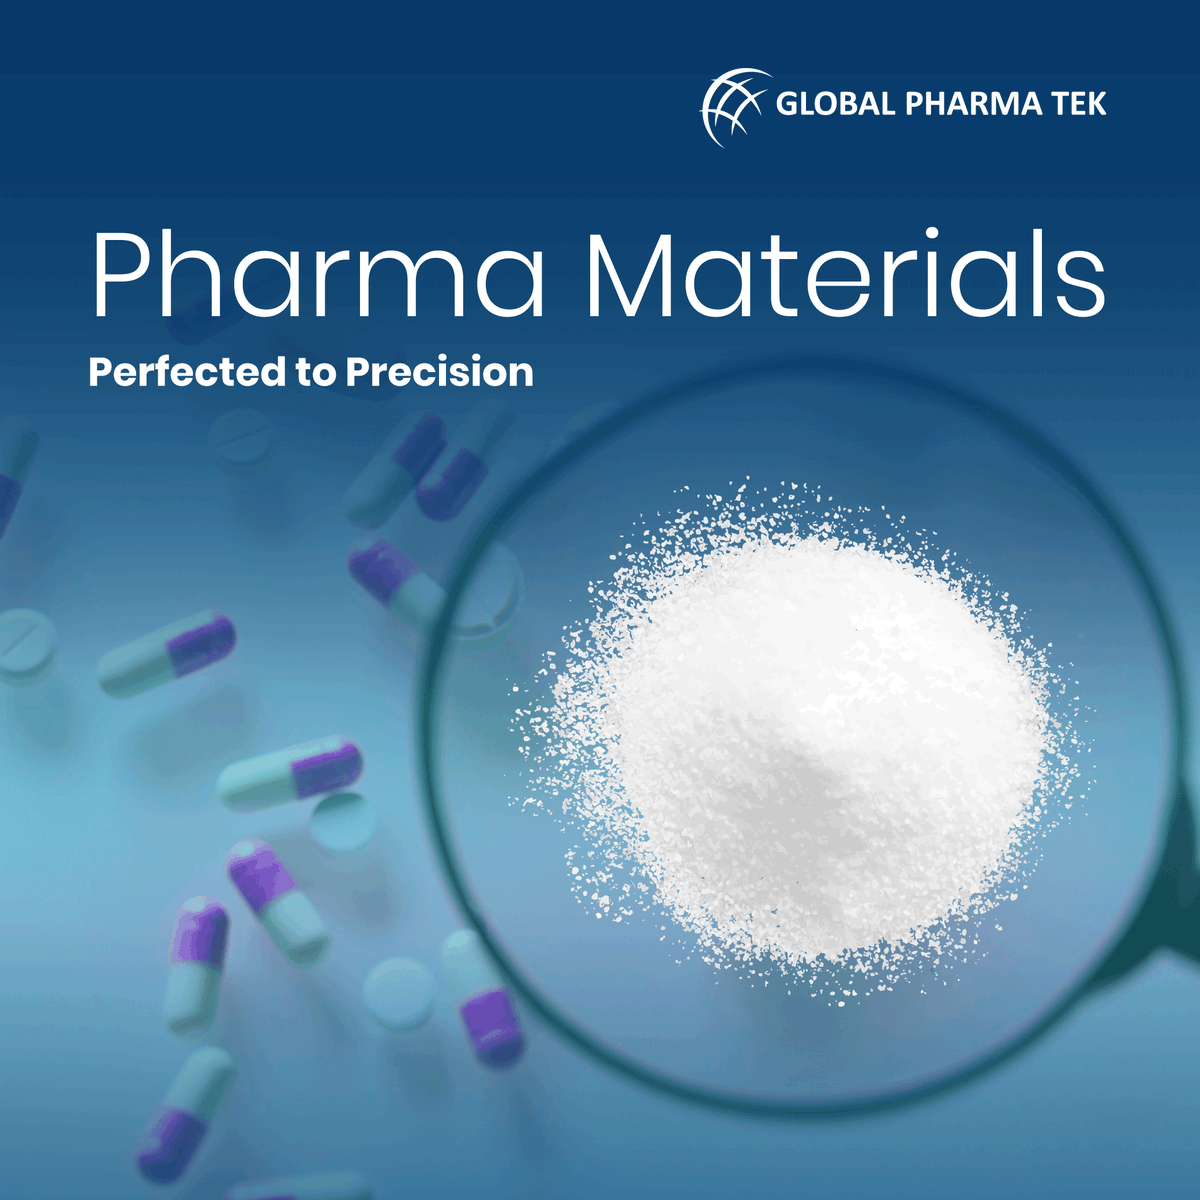 Are you on the search for the best pharma materials? Well, search no more as we have pharma materials of superior quality in different quantities from grams to tonnages. 
globalpharmatek.com
#PharmaMaterials #QualityChemicals #SuperiorQuality #PharmaIngredients #rawmaterials